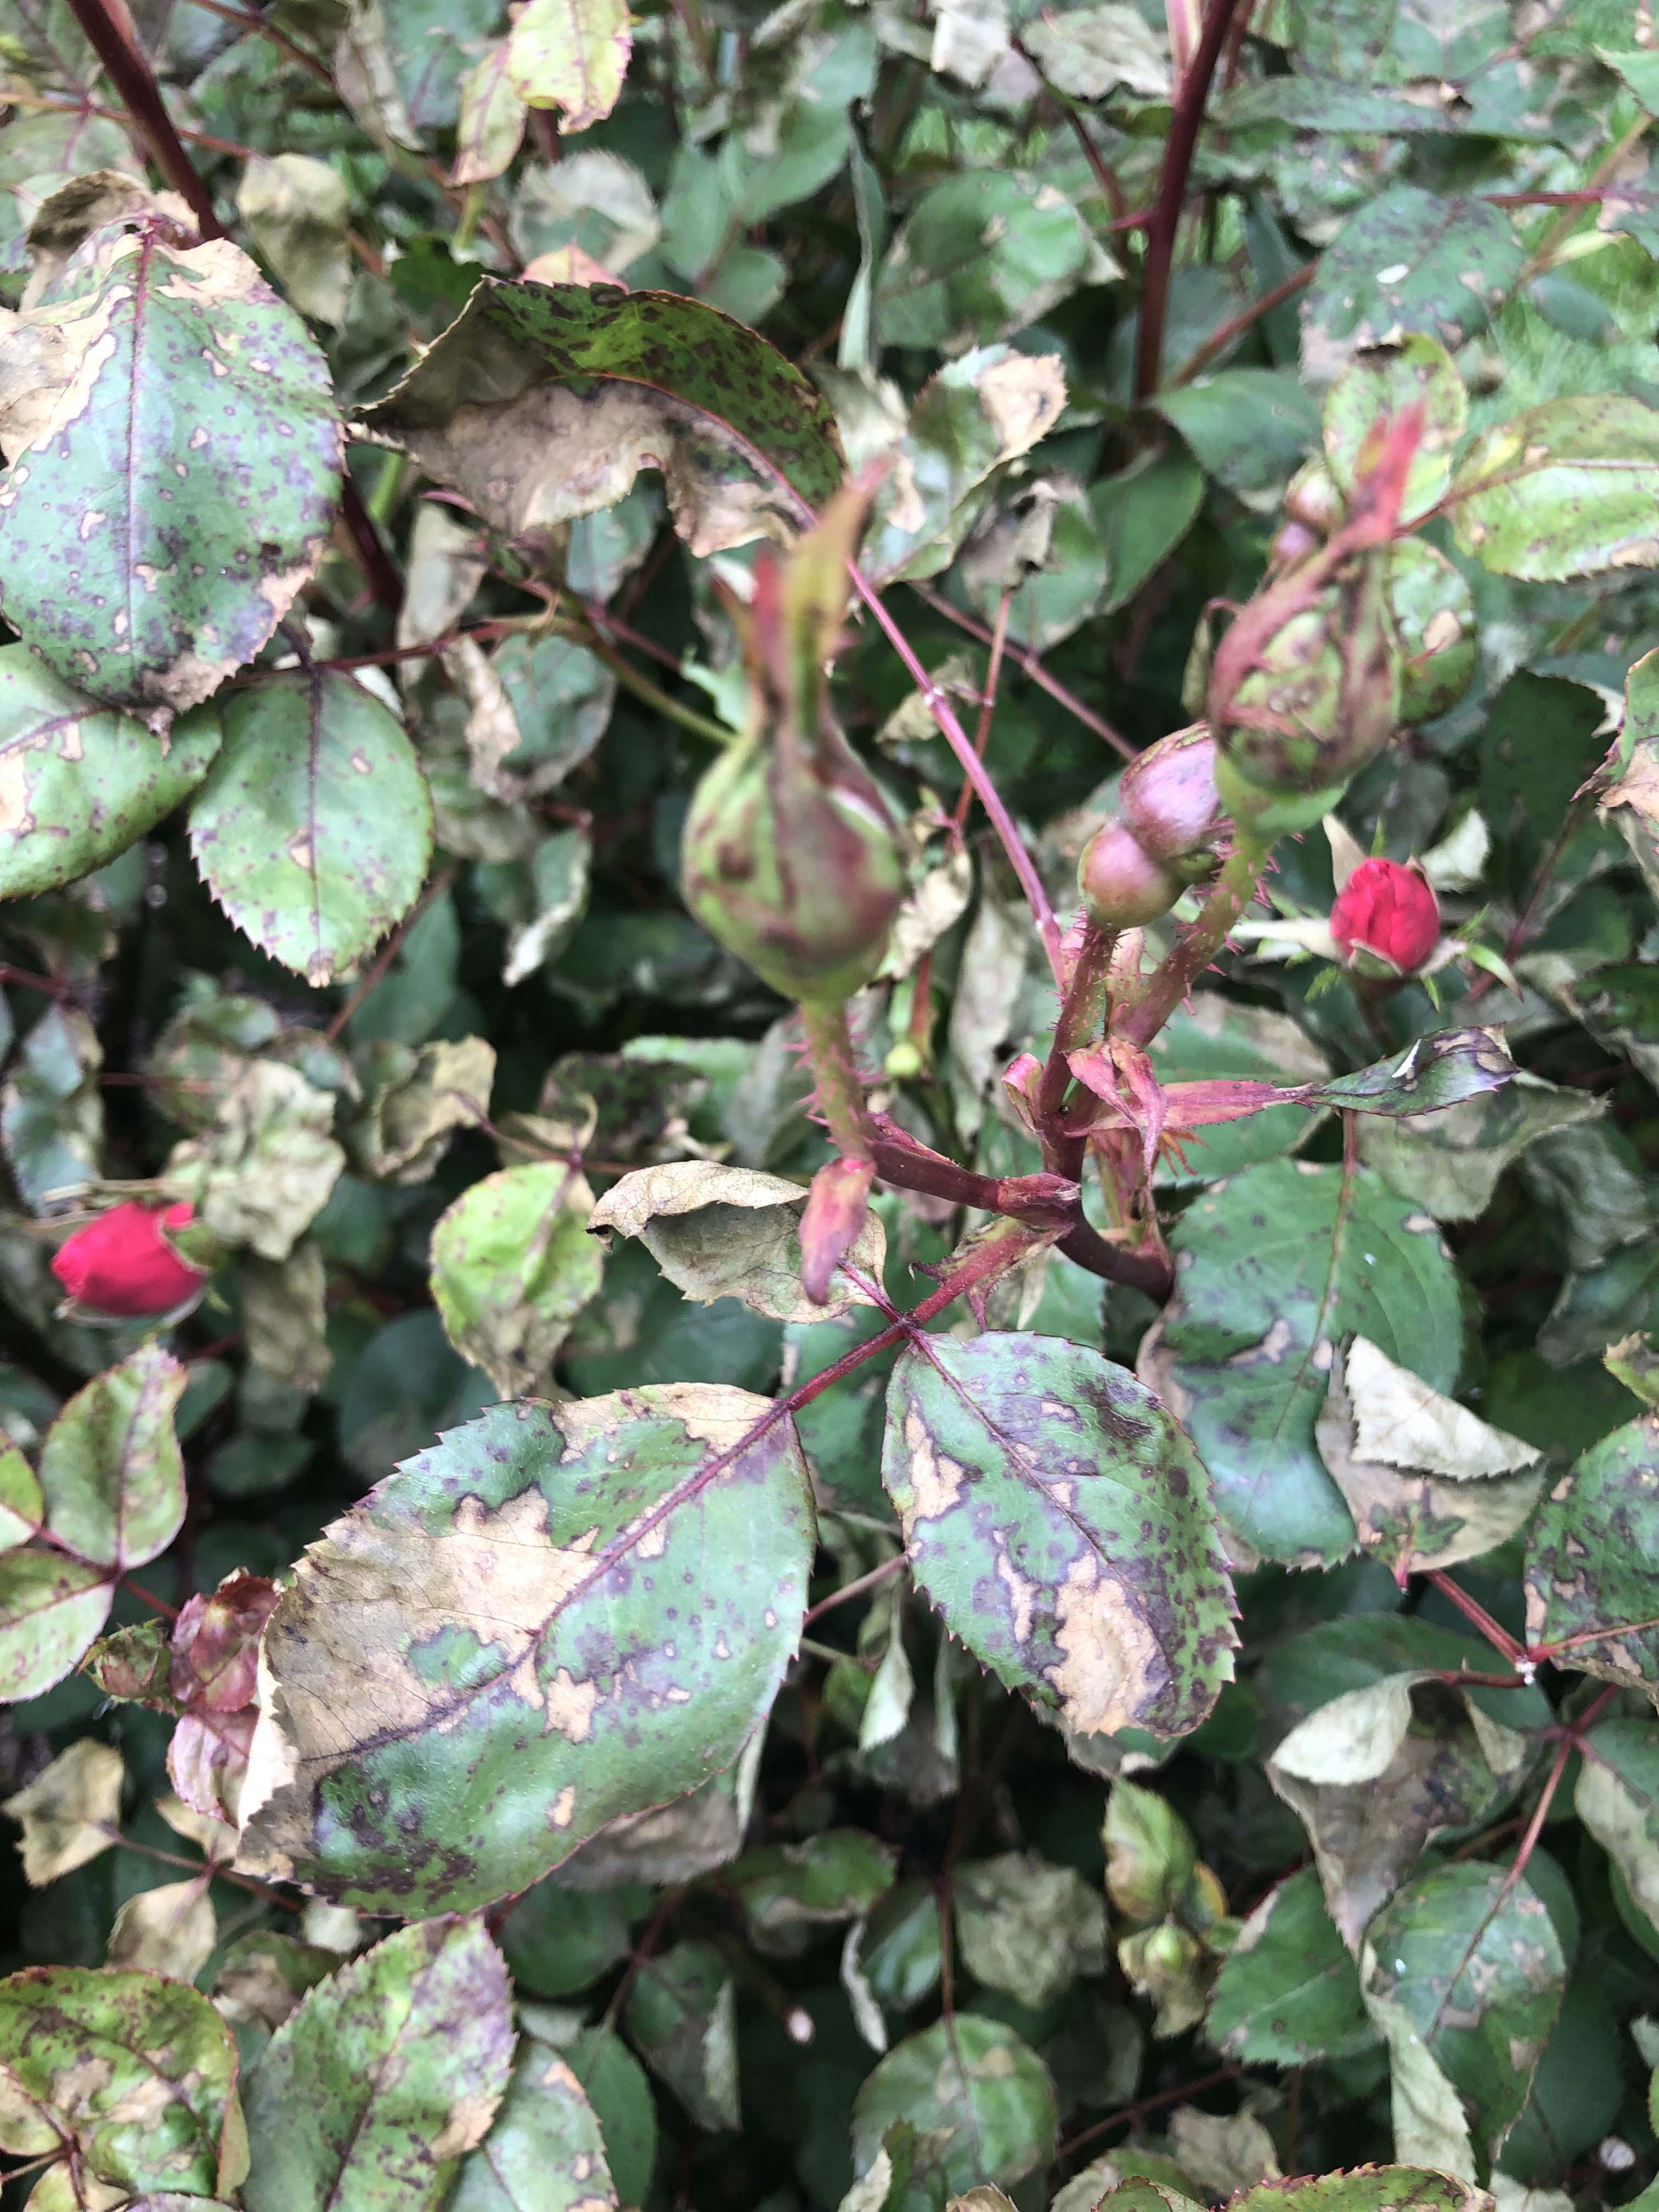 Fungal (?) disease(s) on roses, apparently resistant to fungicides ...